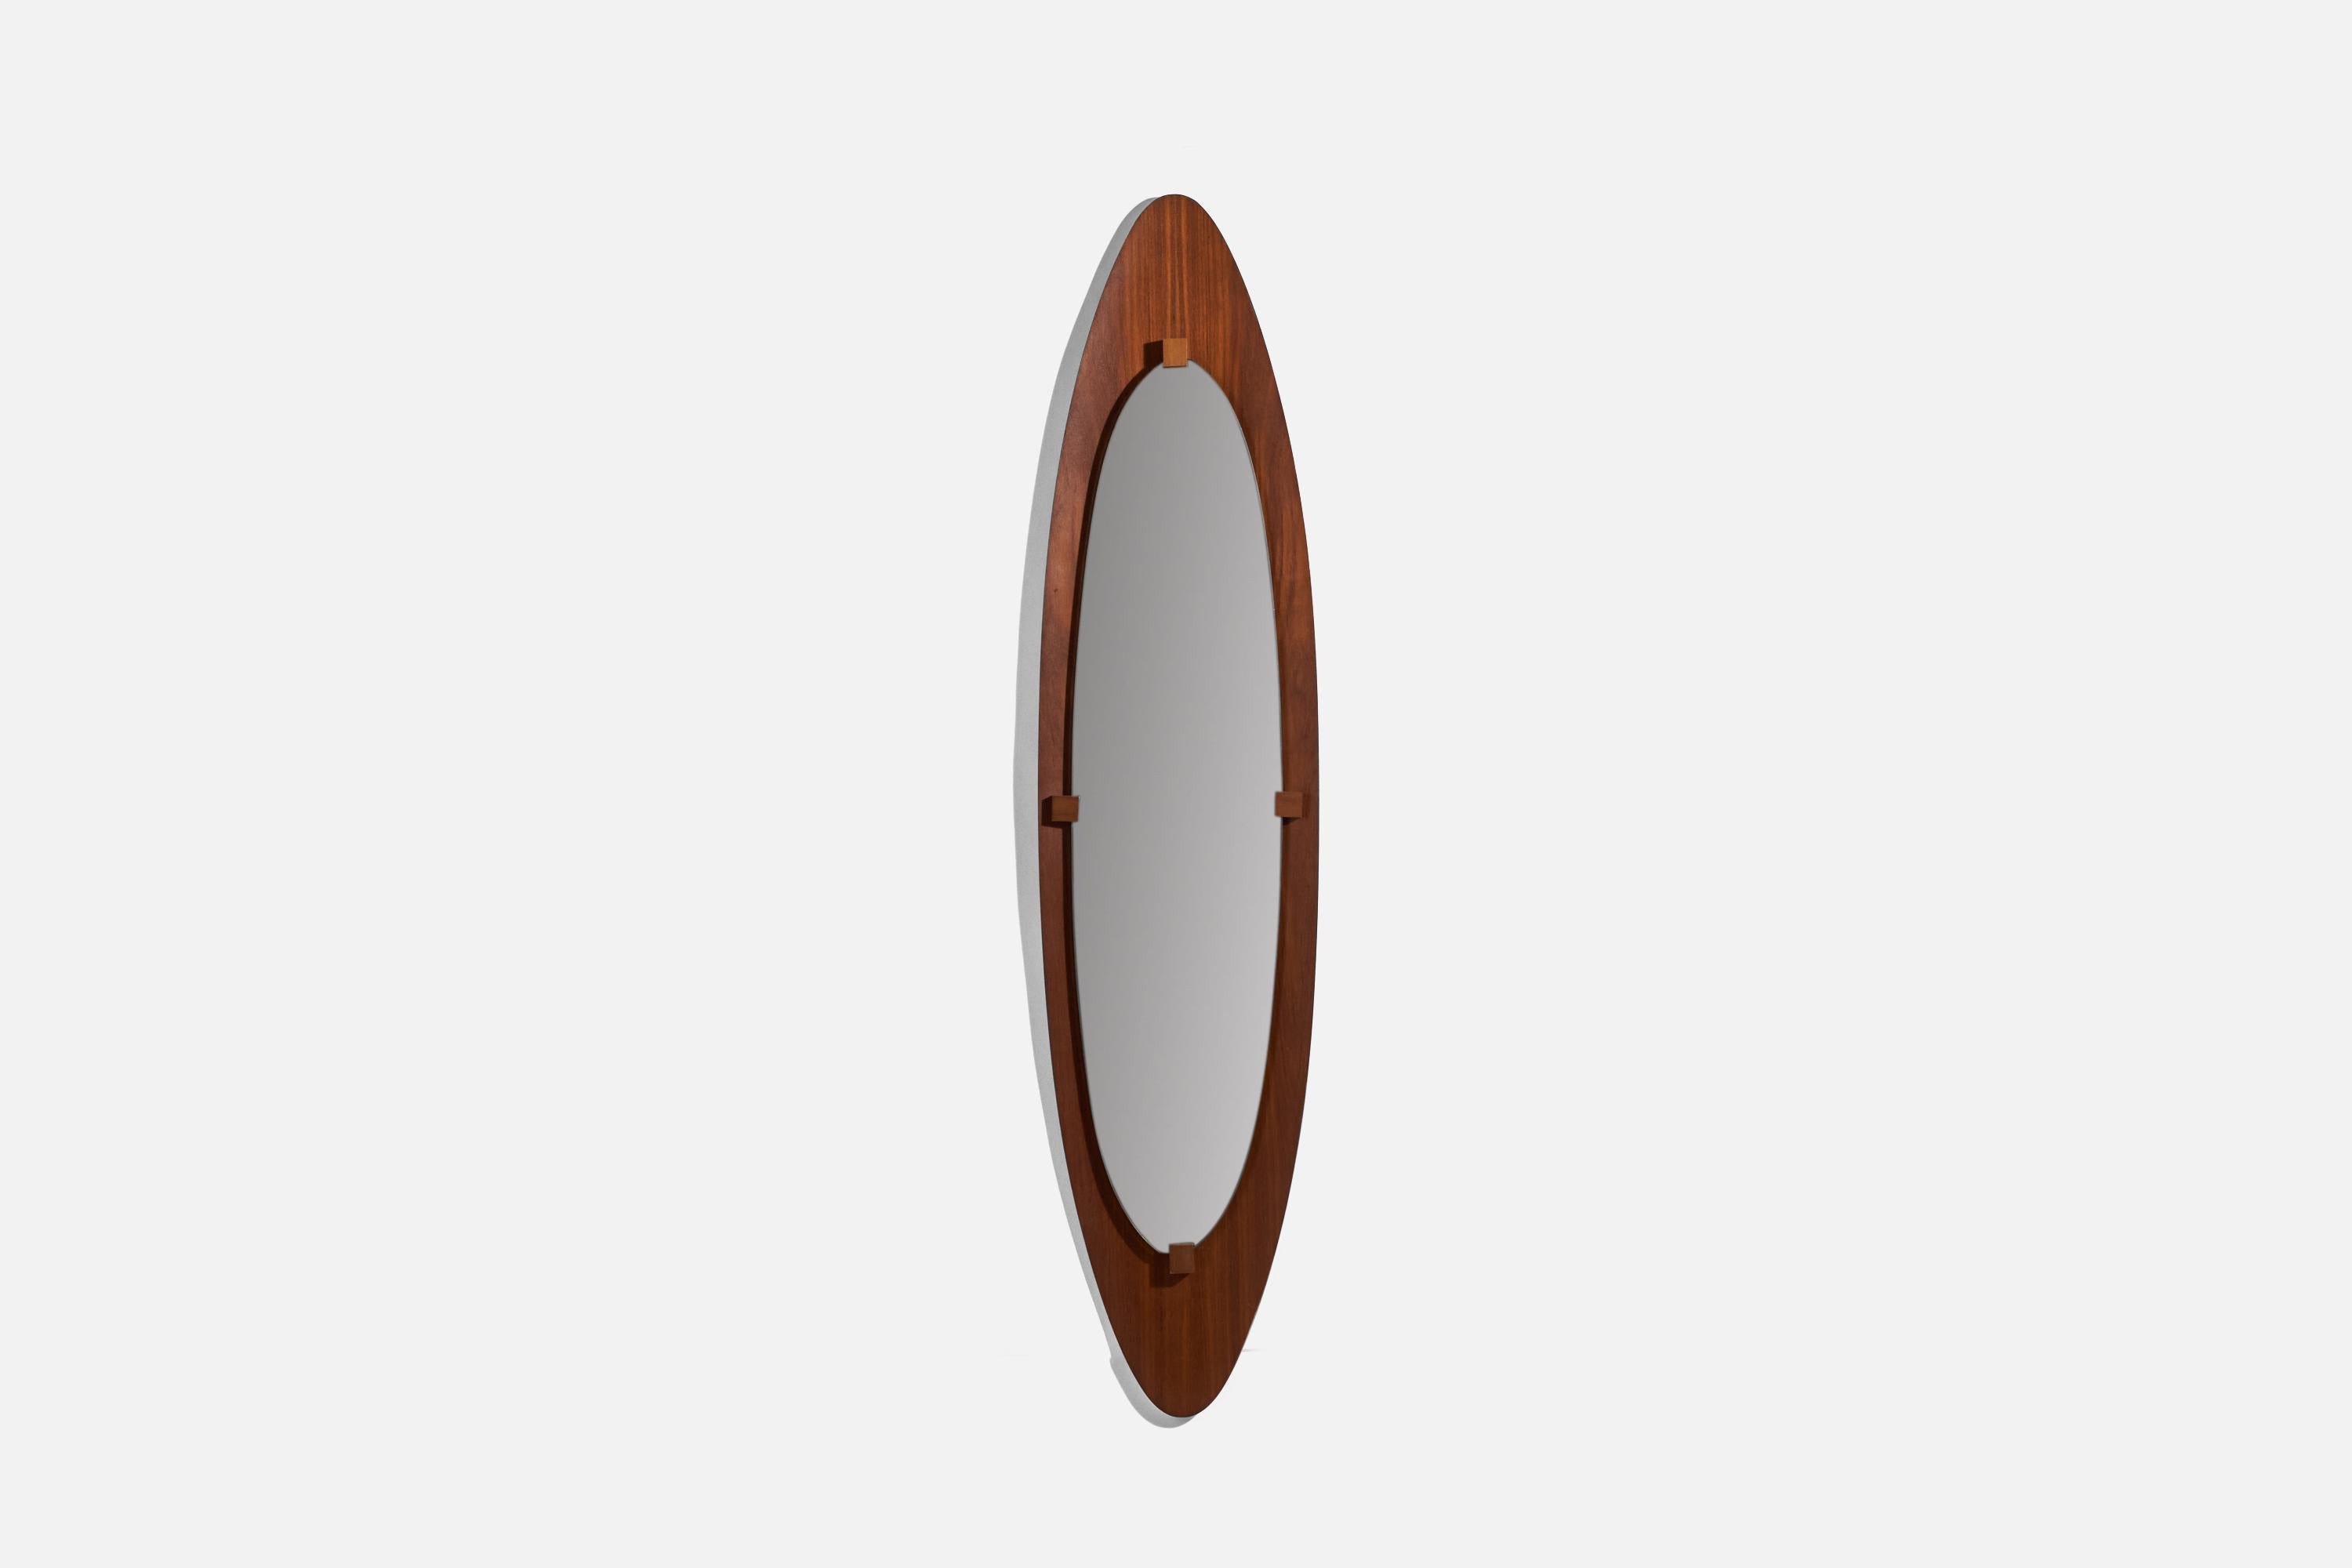 A teak wall mirror; design attributed to Franco Campo and Carlo Graffi and presumably produced by Home, Italy, 1950s.